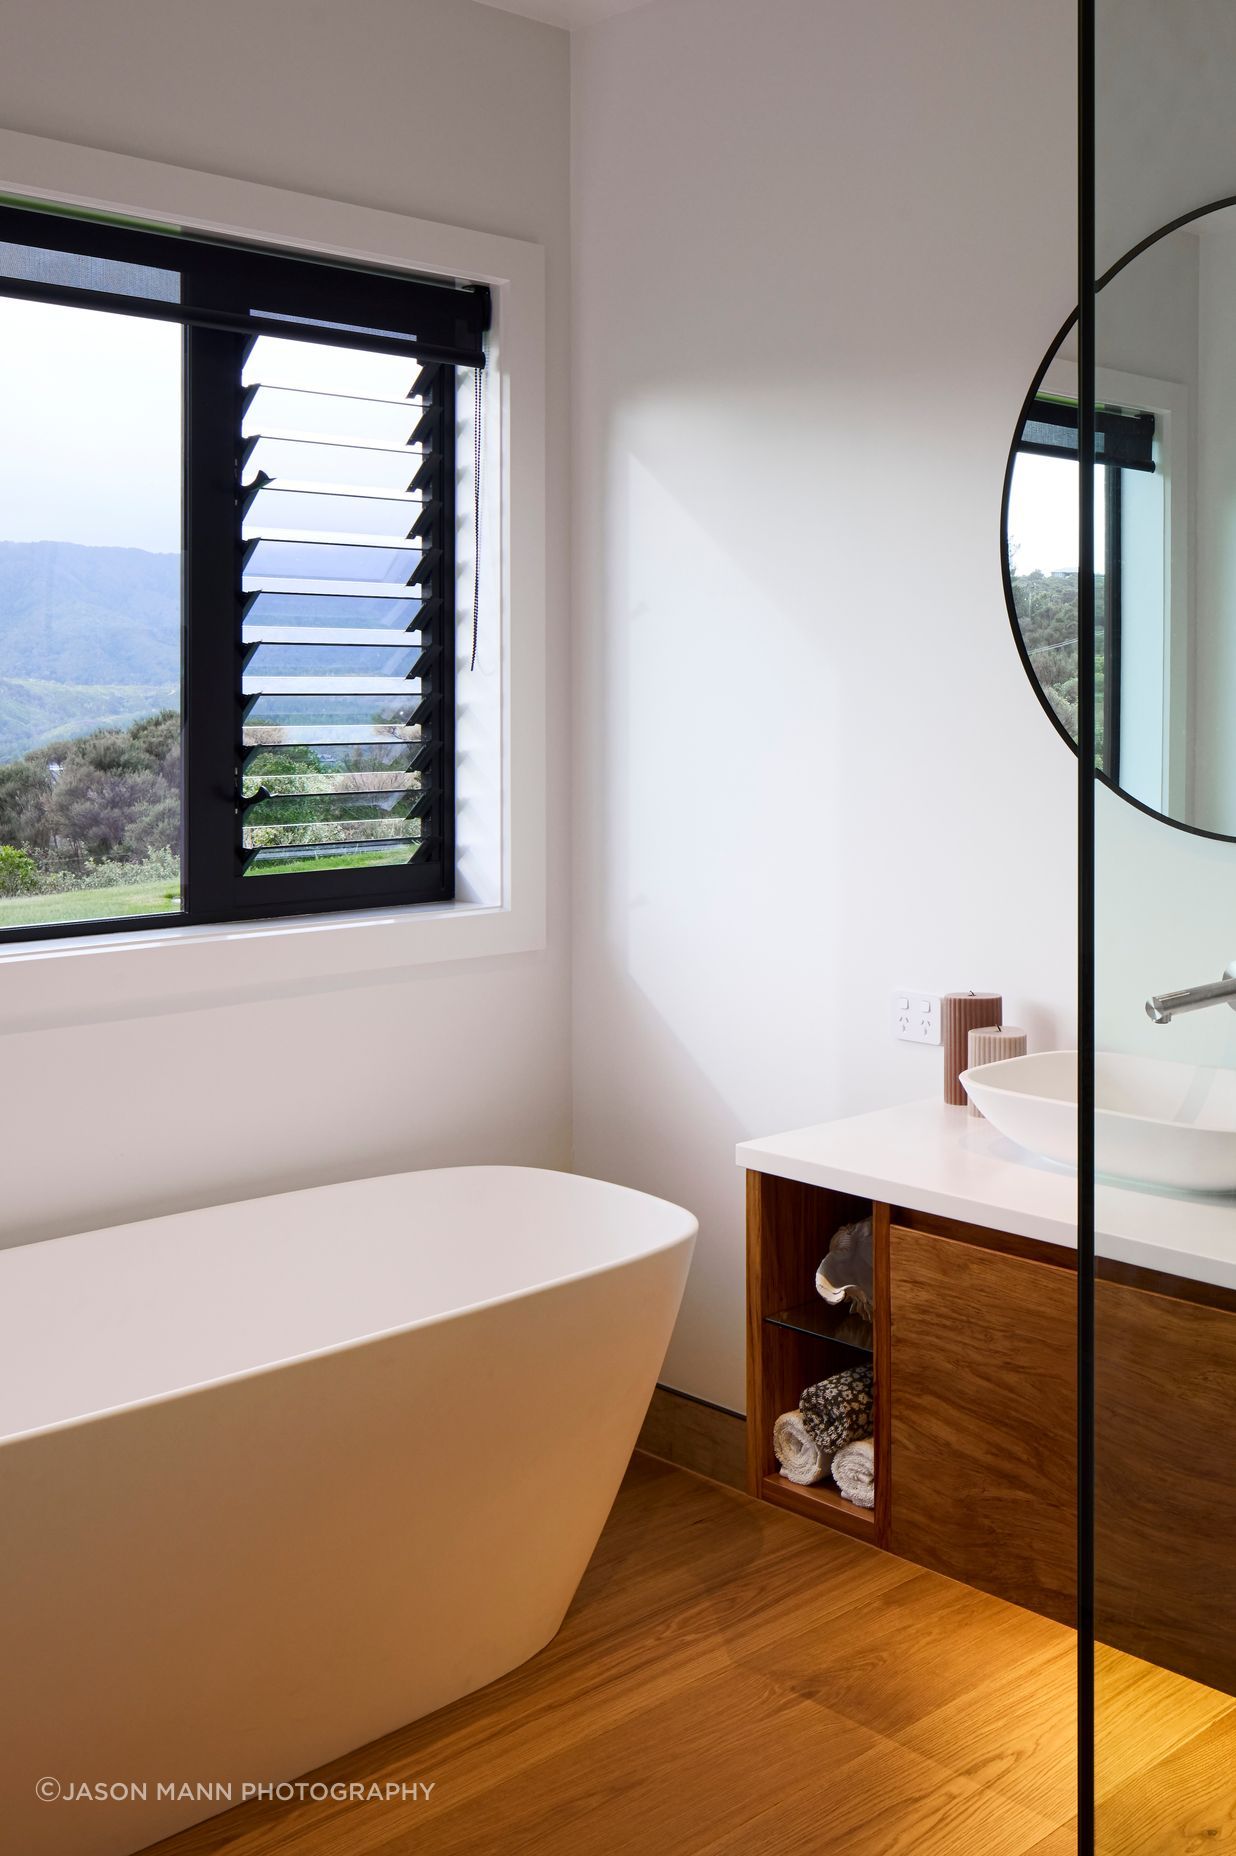 The guest bathroom is equally elegant with natural timbers and a freestanding bathtub.